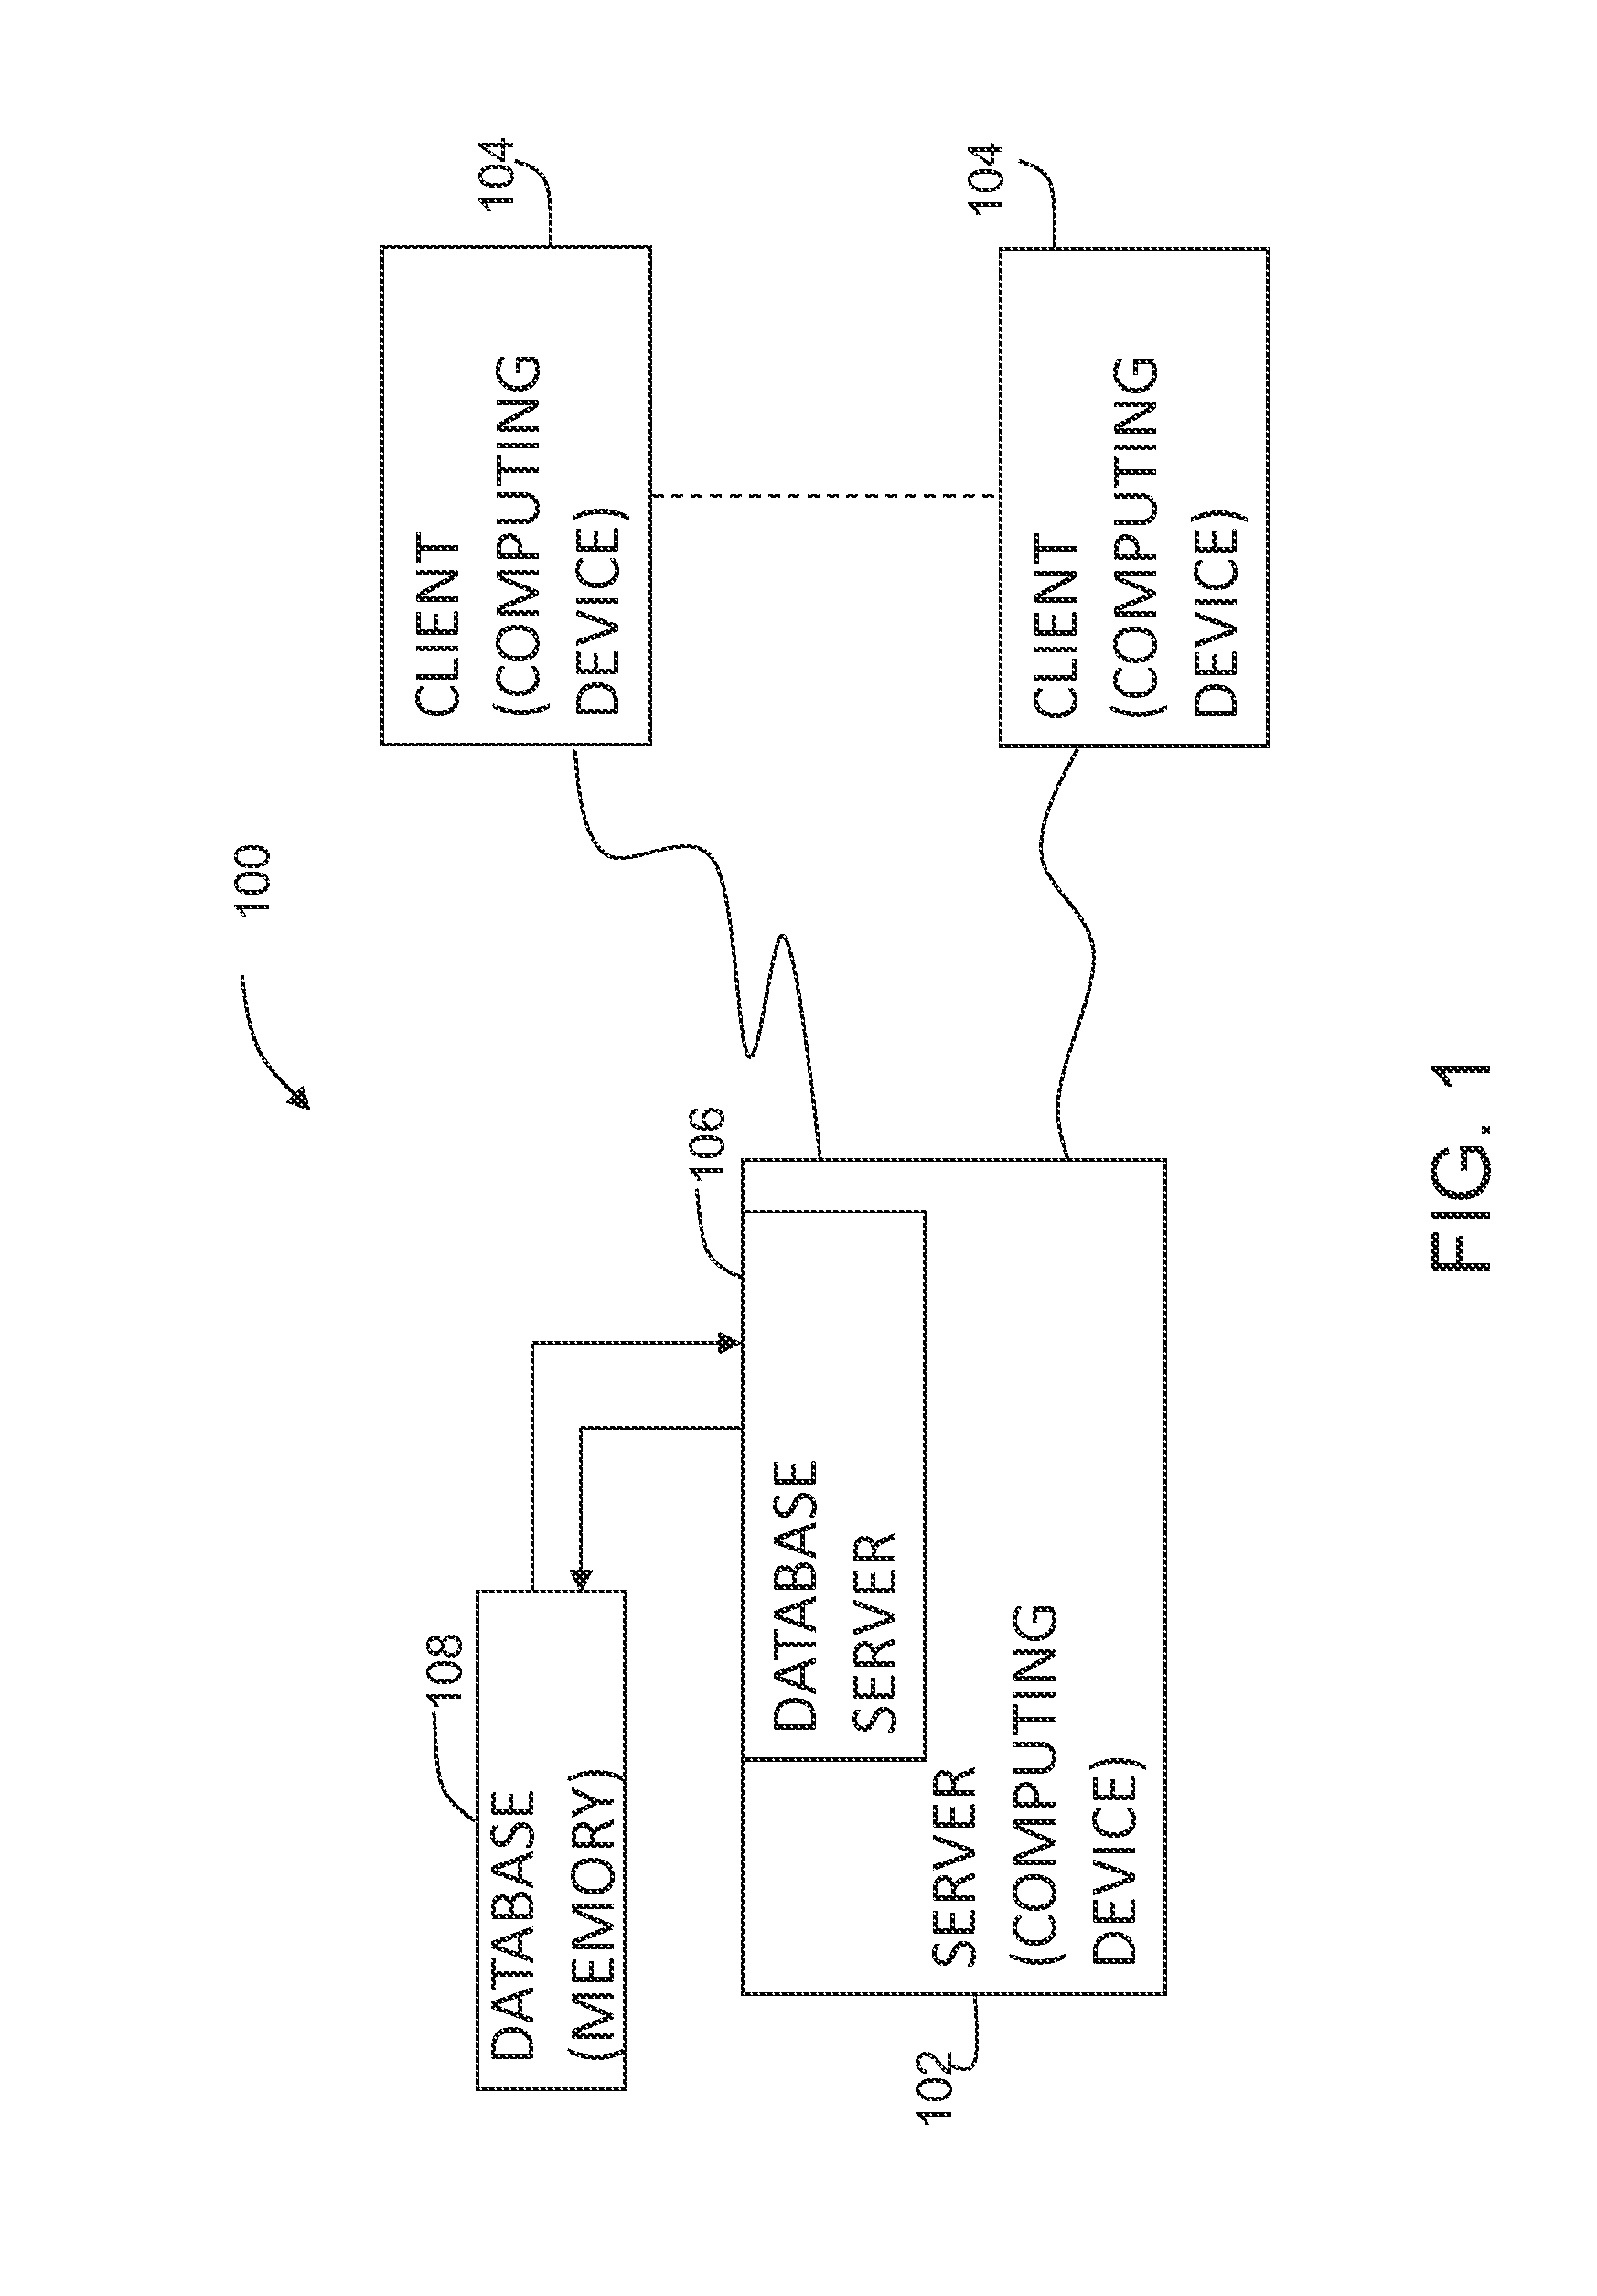 Systems and methods for detecting aircraft maintenance events and maintenance intervals